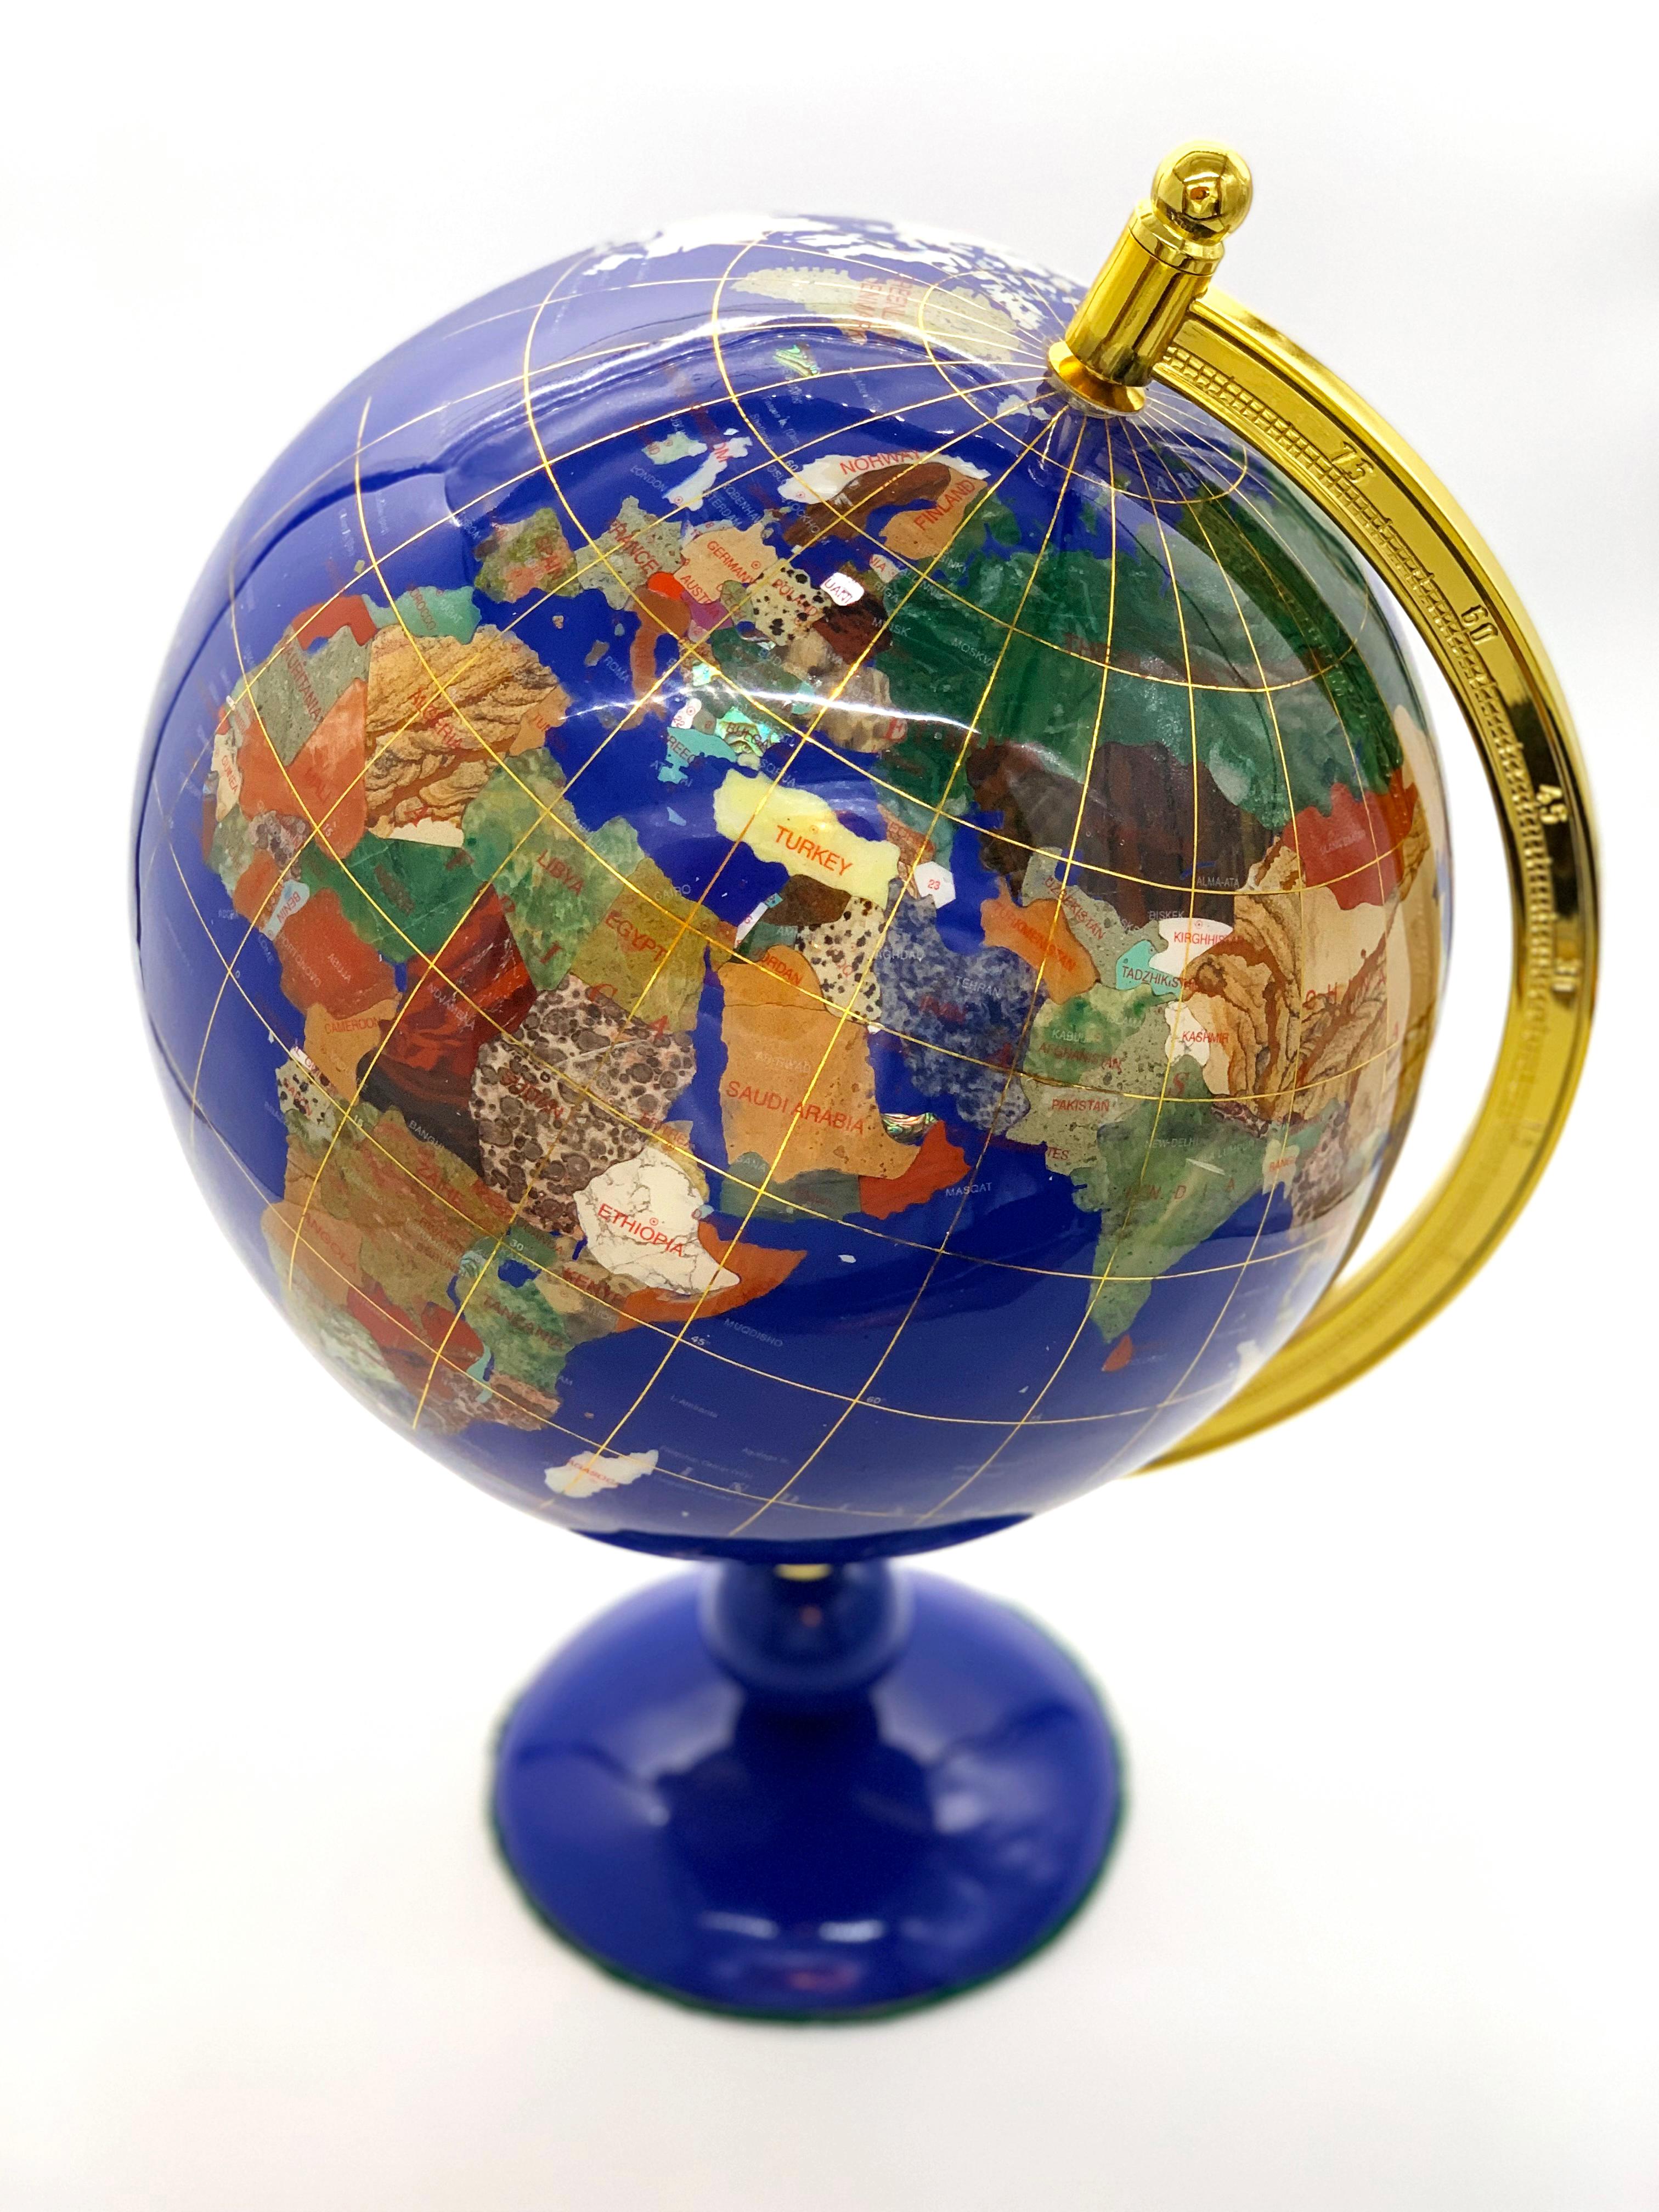 This beautiful globe has been handmade from high quality gemstones, semiprecious stones and shells.
Incredible detail - individual gemstone or shell for each country and then the globe has been coated with resin for protection.
The globe can